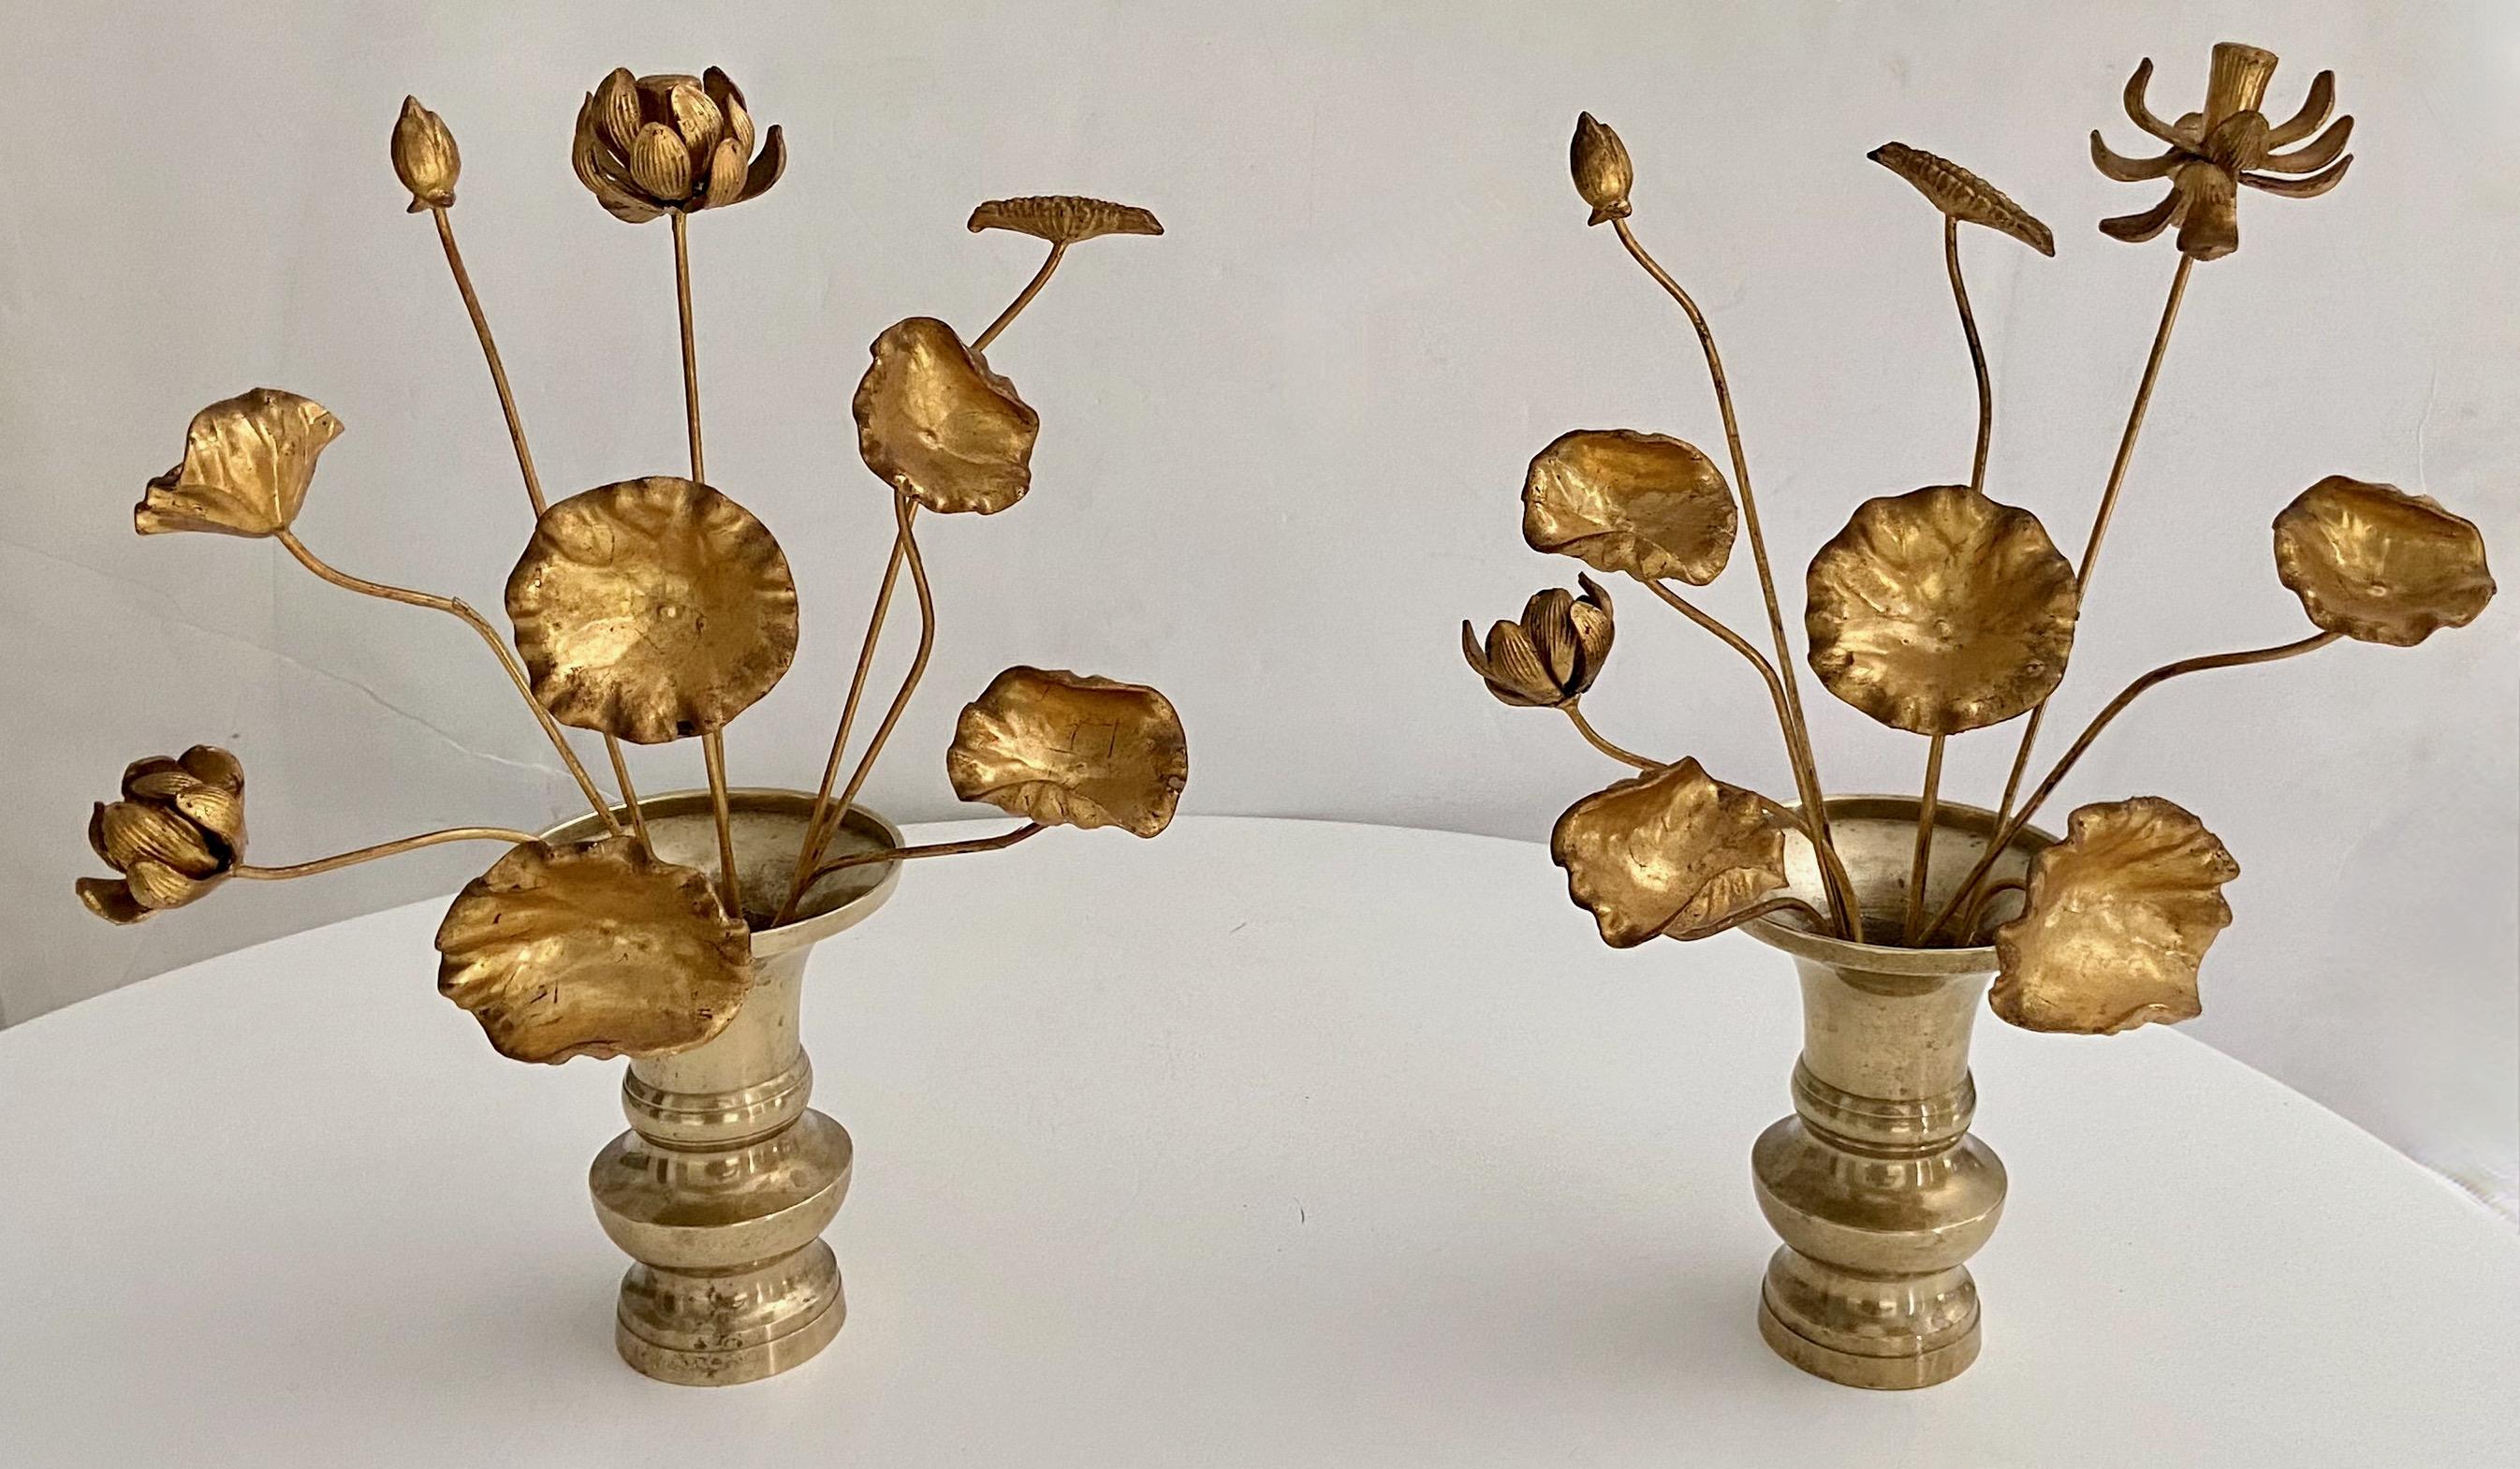 A pair of beautifully intricately hand carved lacquered and 23K giltwood altar flowers displayed in bronze vases. Late Meiji Period. Lotus leaves and flowers of this type were placed in bronze vases as ritual offerings in place of real flowers and